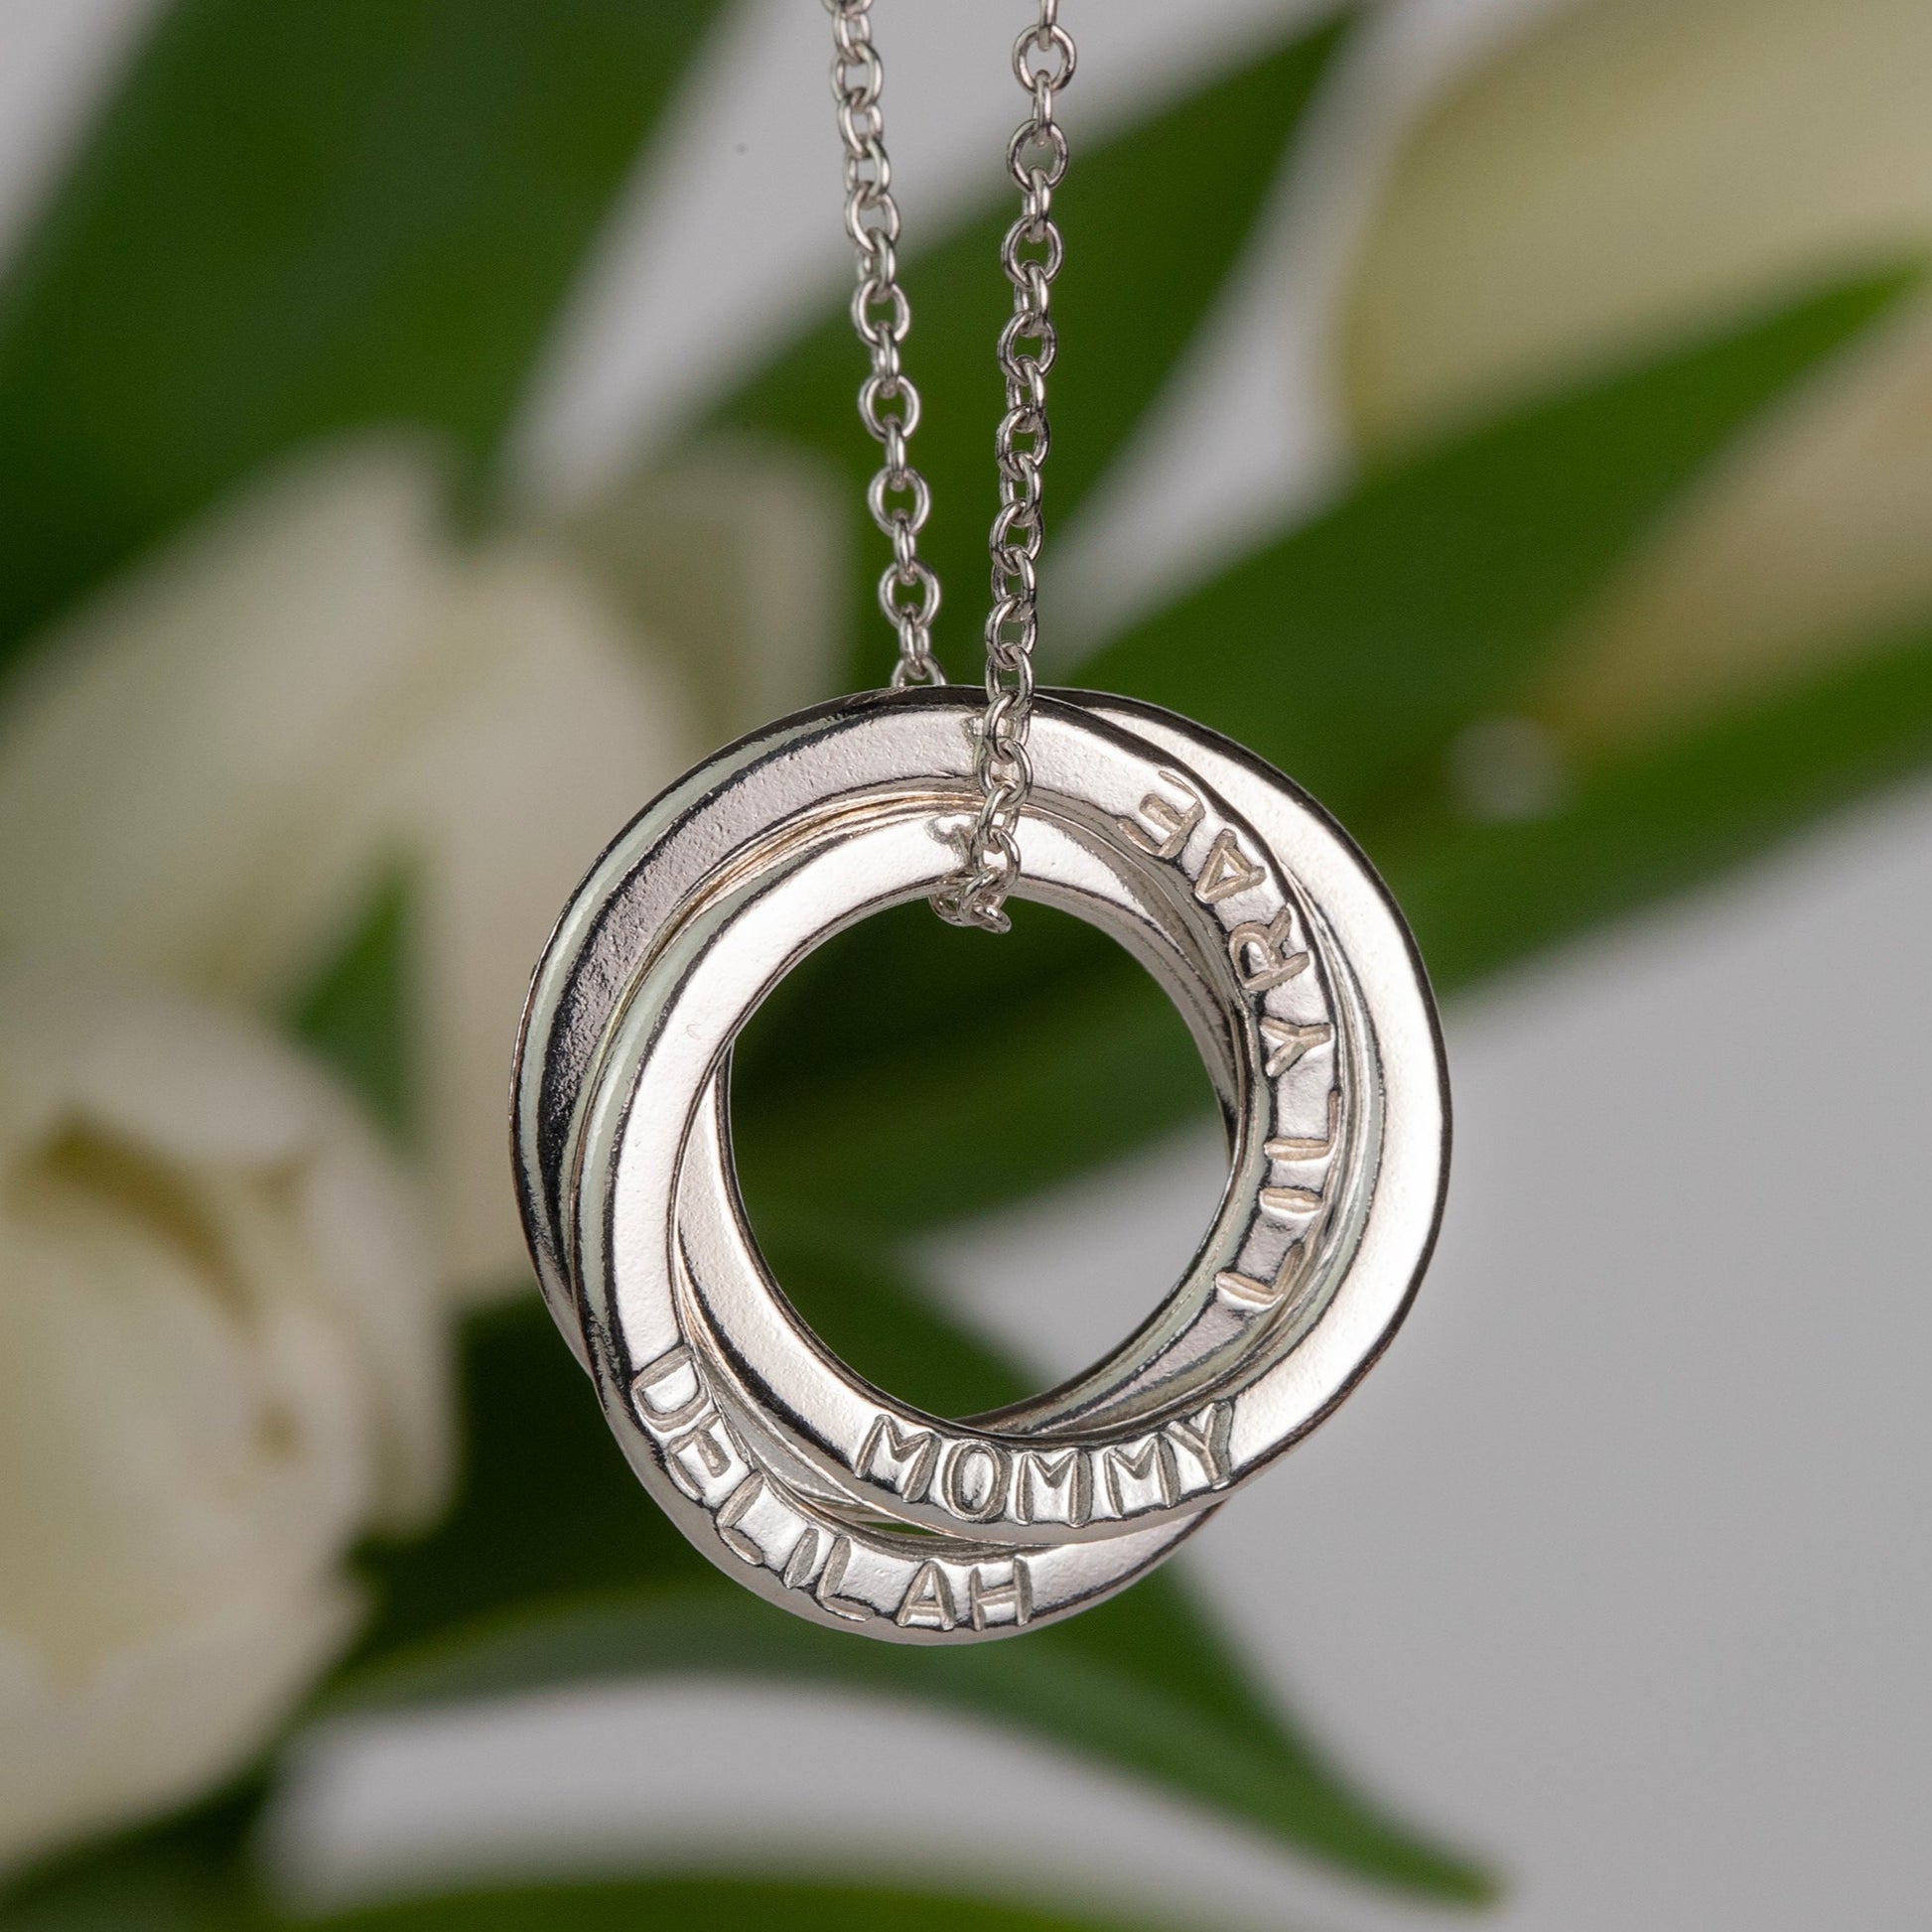 Personalised Family Name Necklace - Silver 3 Link - Petite